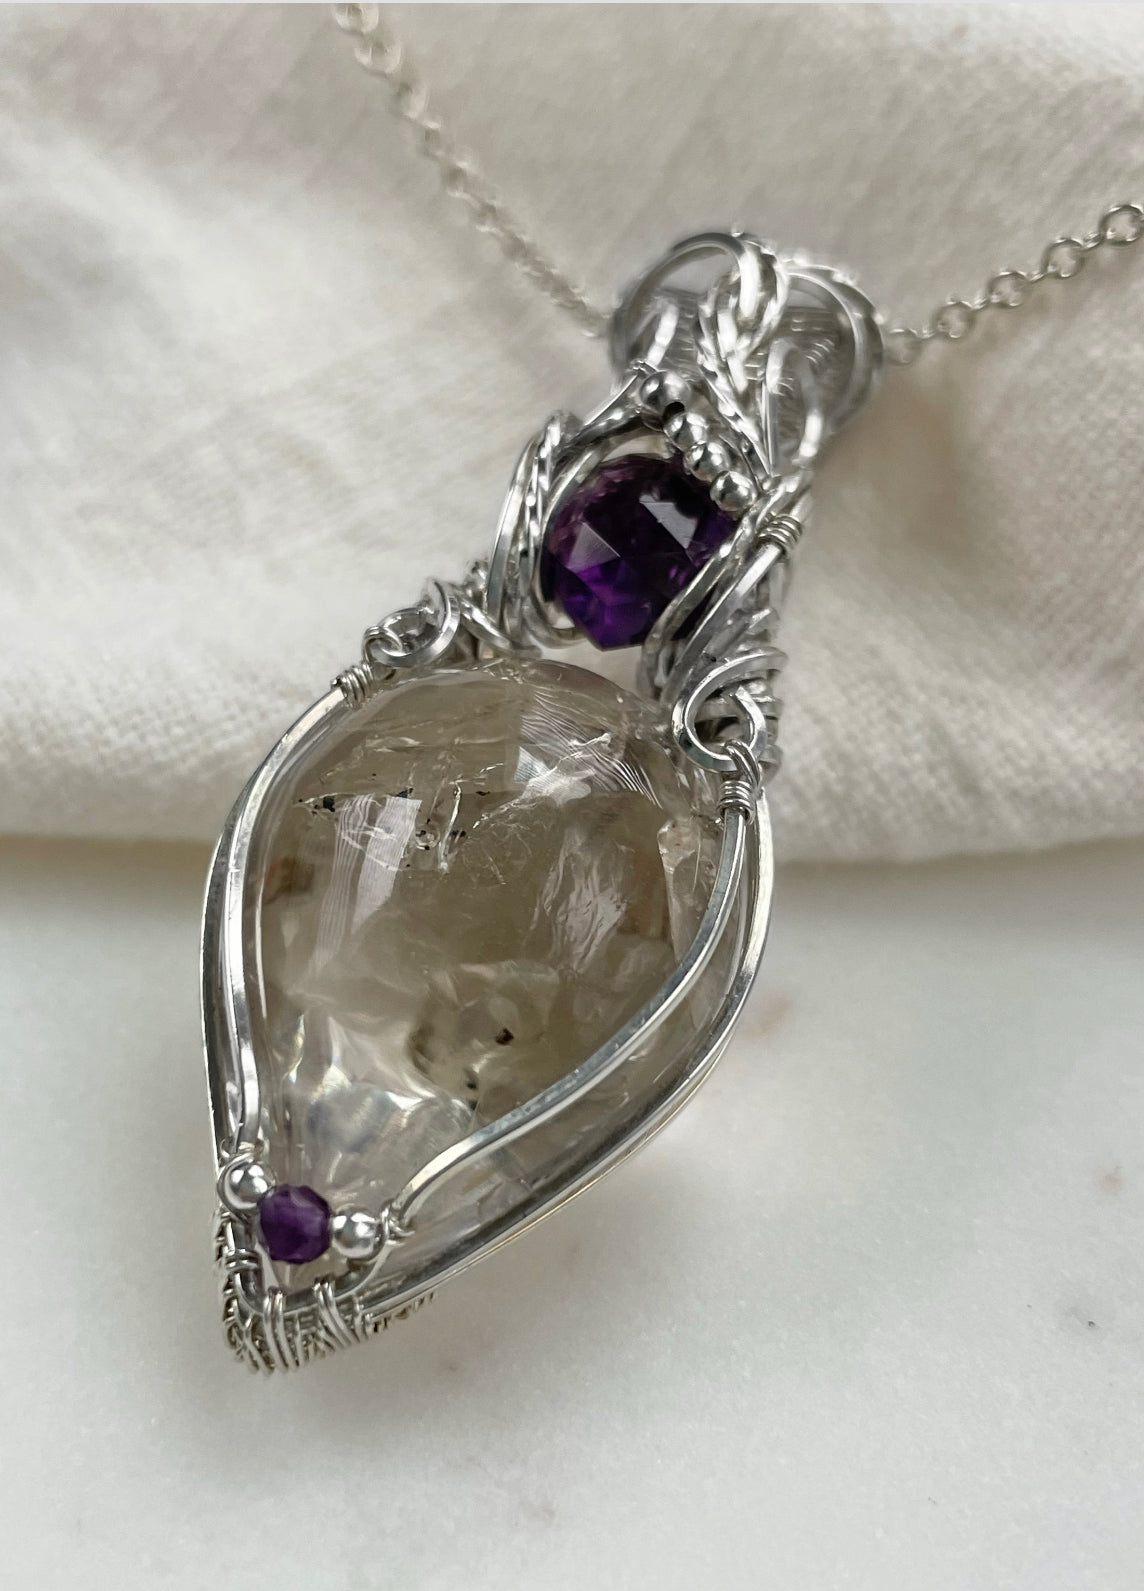 Rare Enhydro Quartz, Amethyst Necklace in 0.925 Sterling Silver